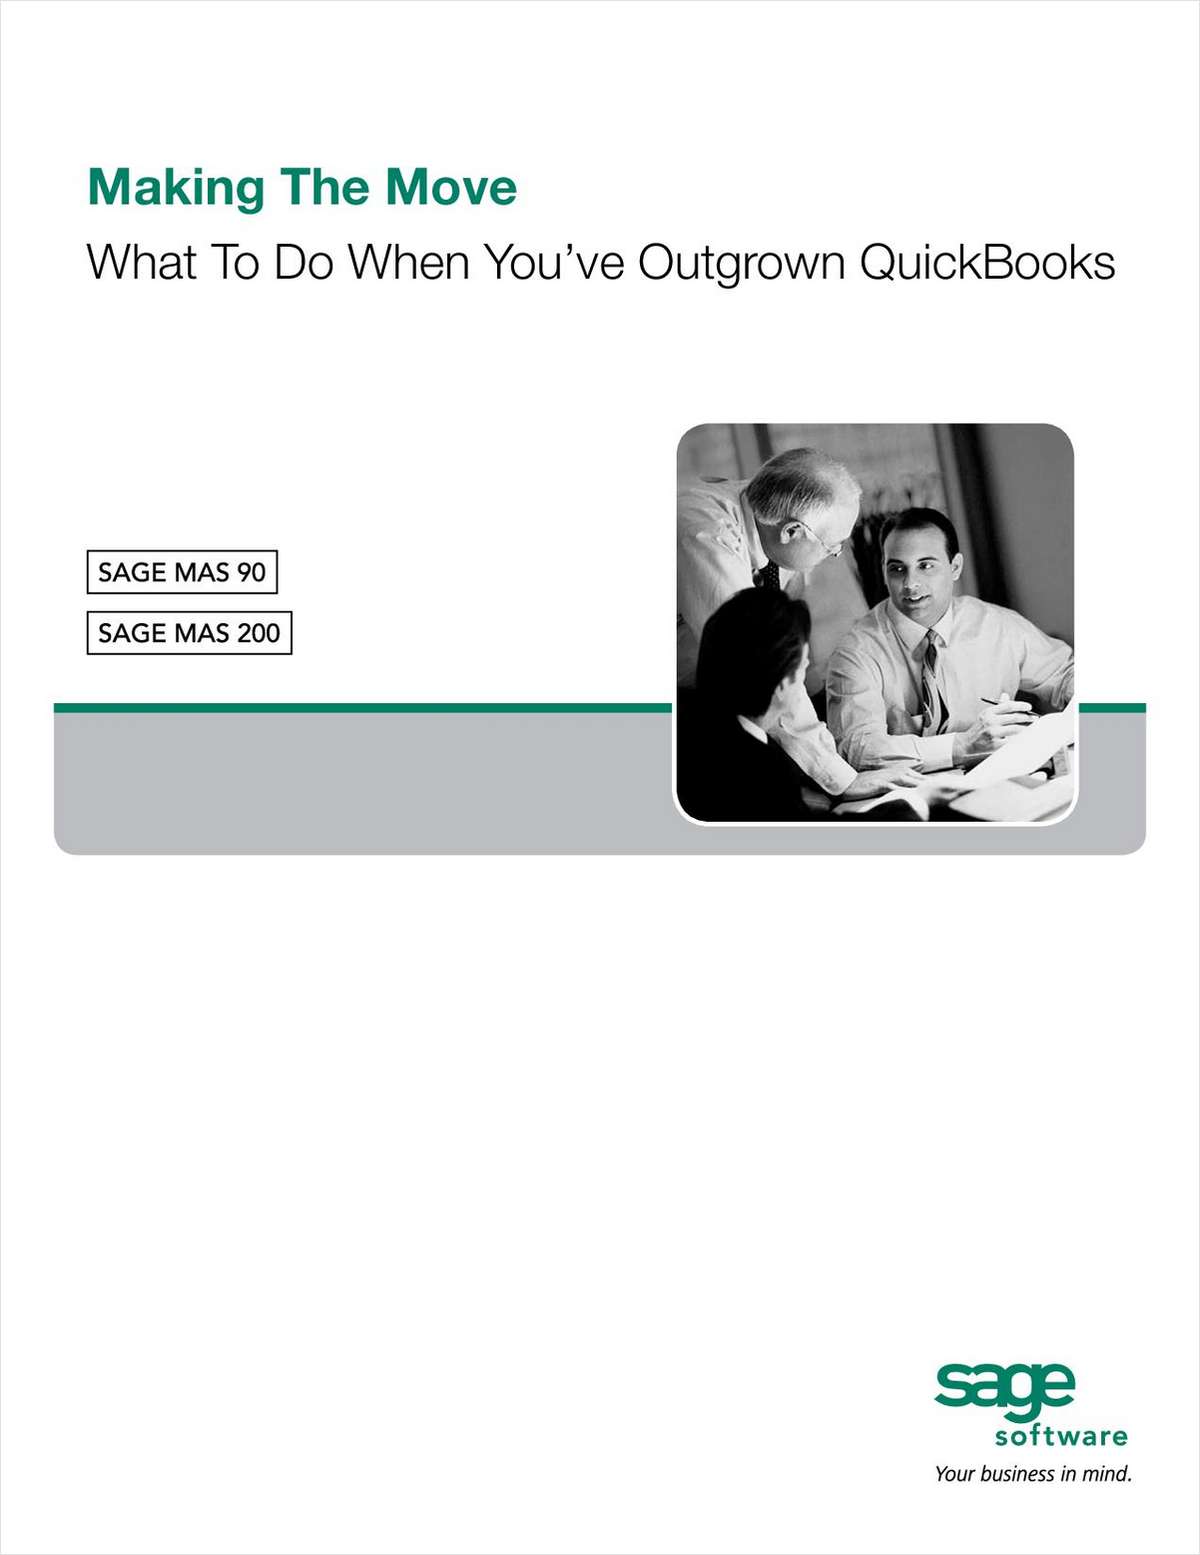 Making The Move - What to Do When You've Outgrown QuickBooks